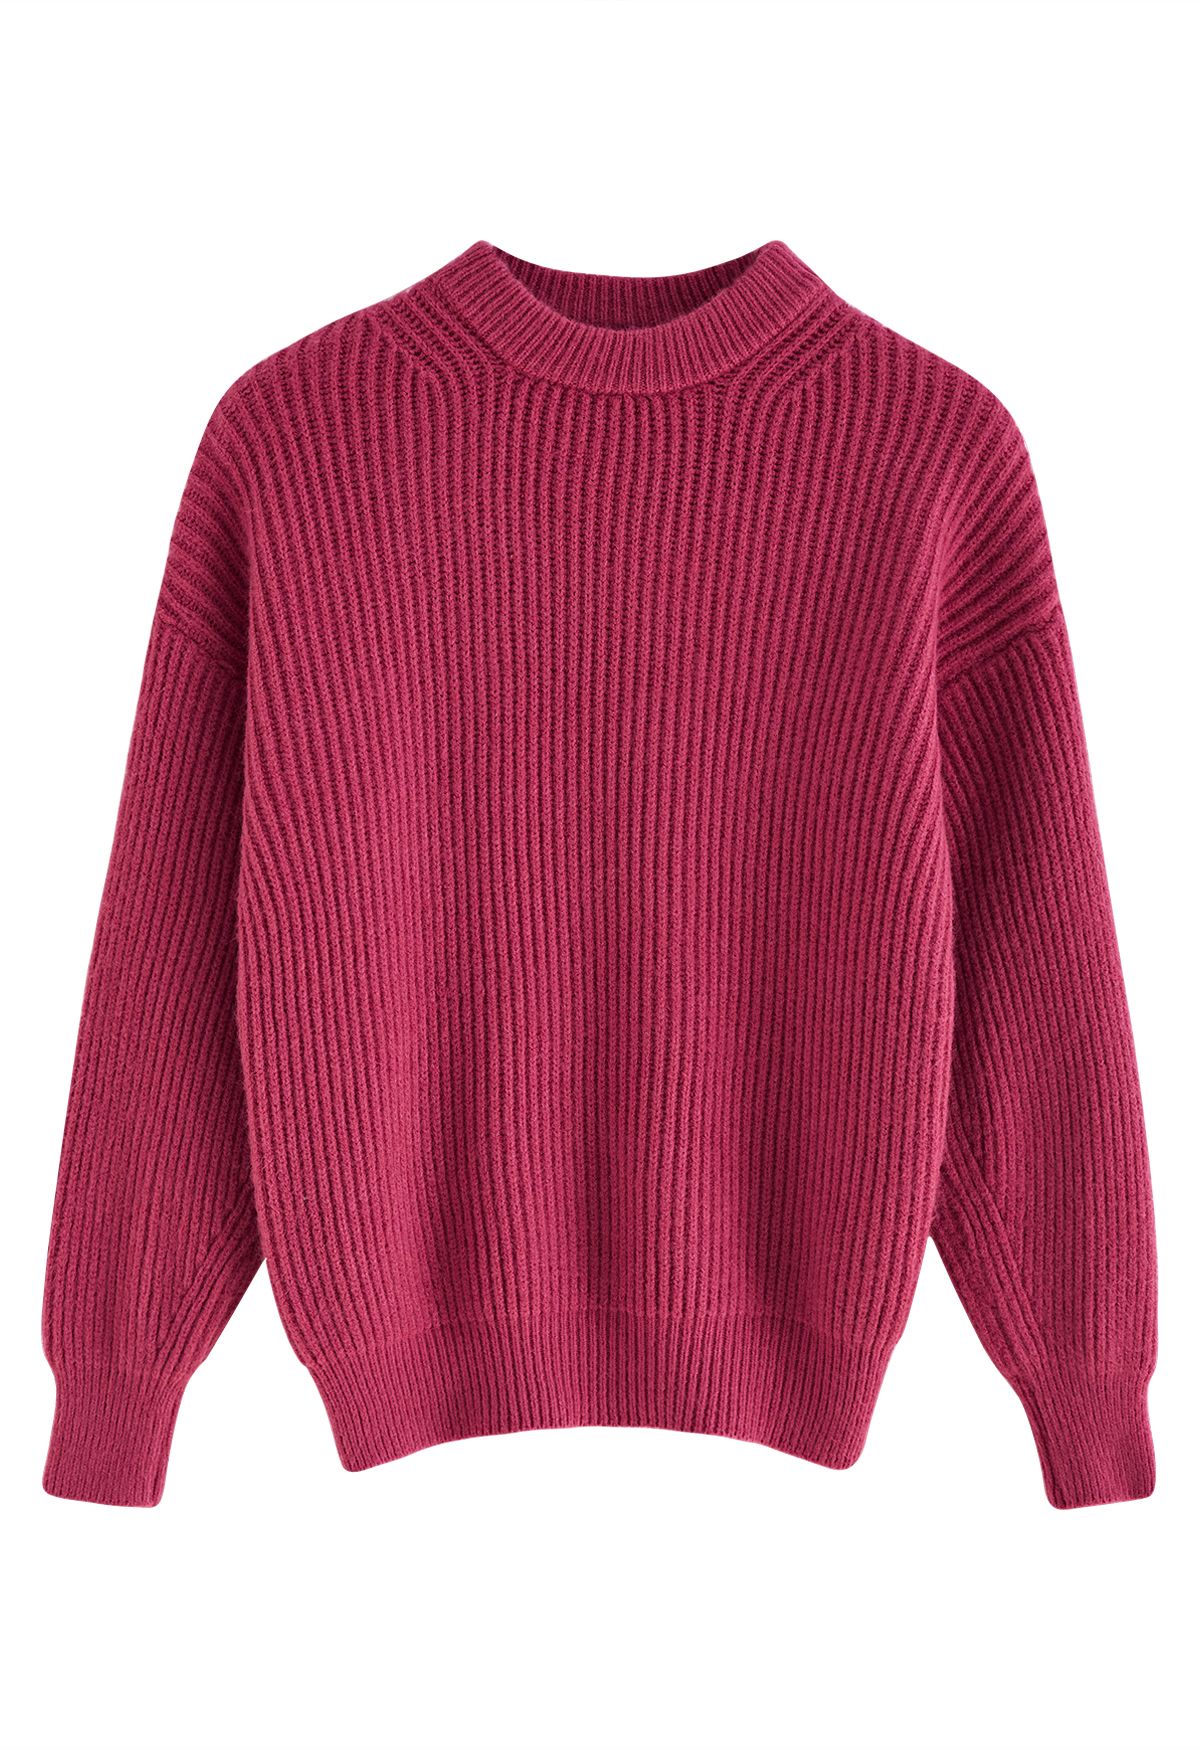 Solid Color Rib Knit Sweater in Berry